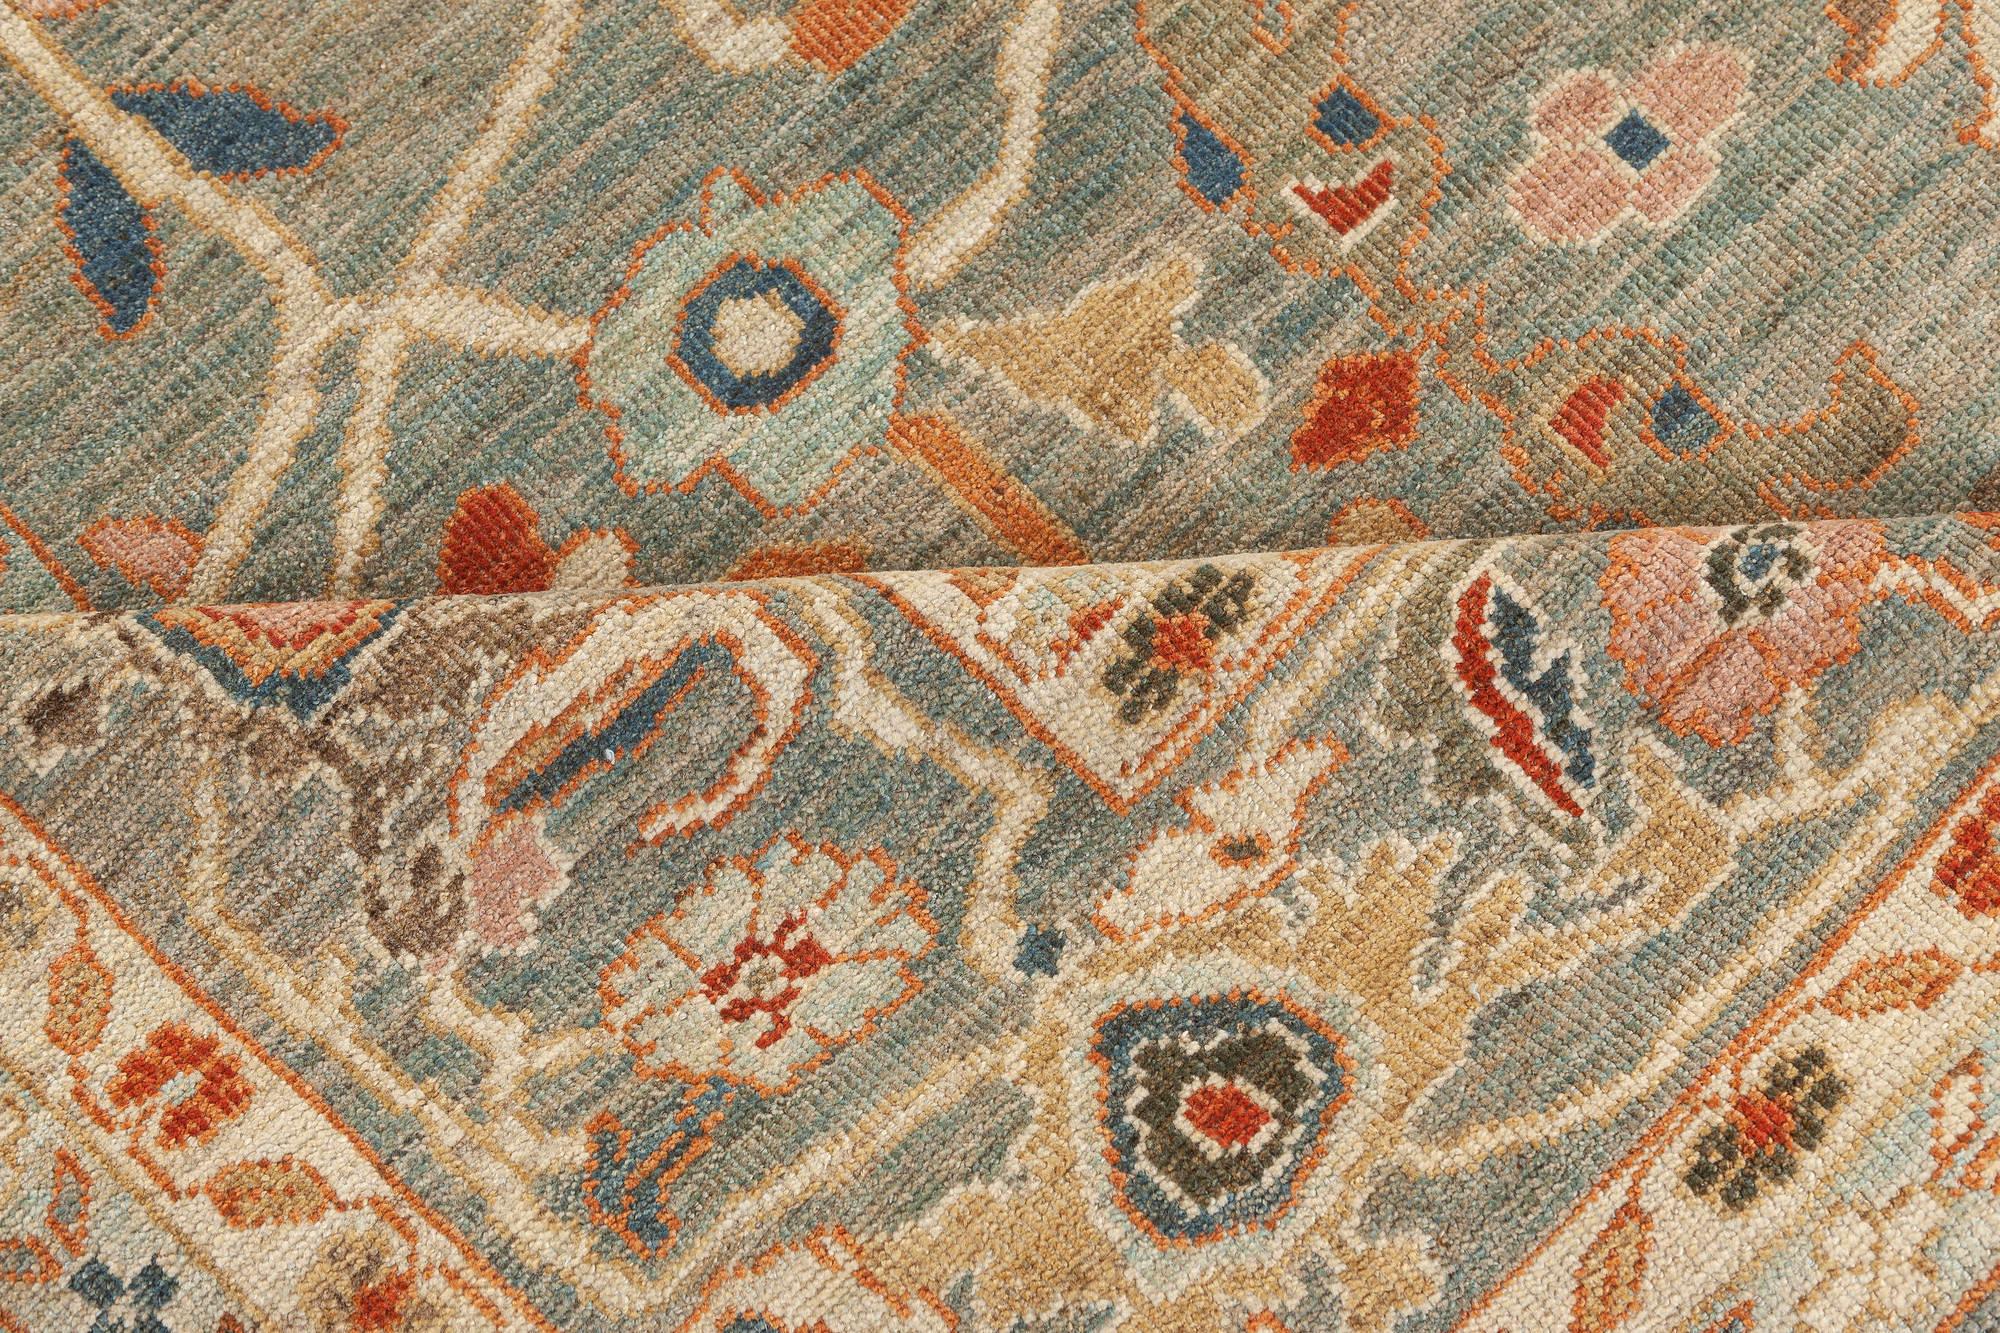 Contemporary Sultanabad inspired hand knotted wool rug by Doris Leslie Blau.
Size: 9'10